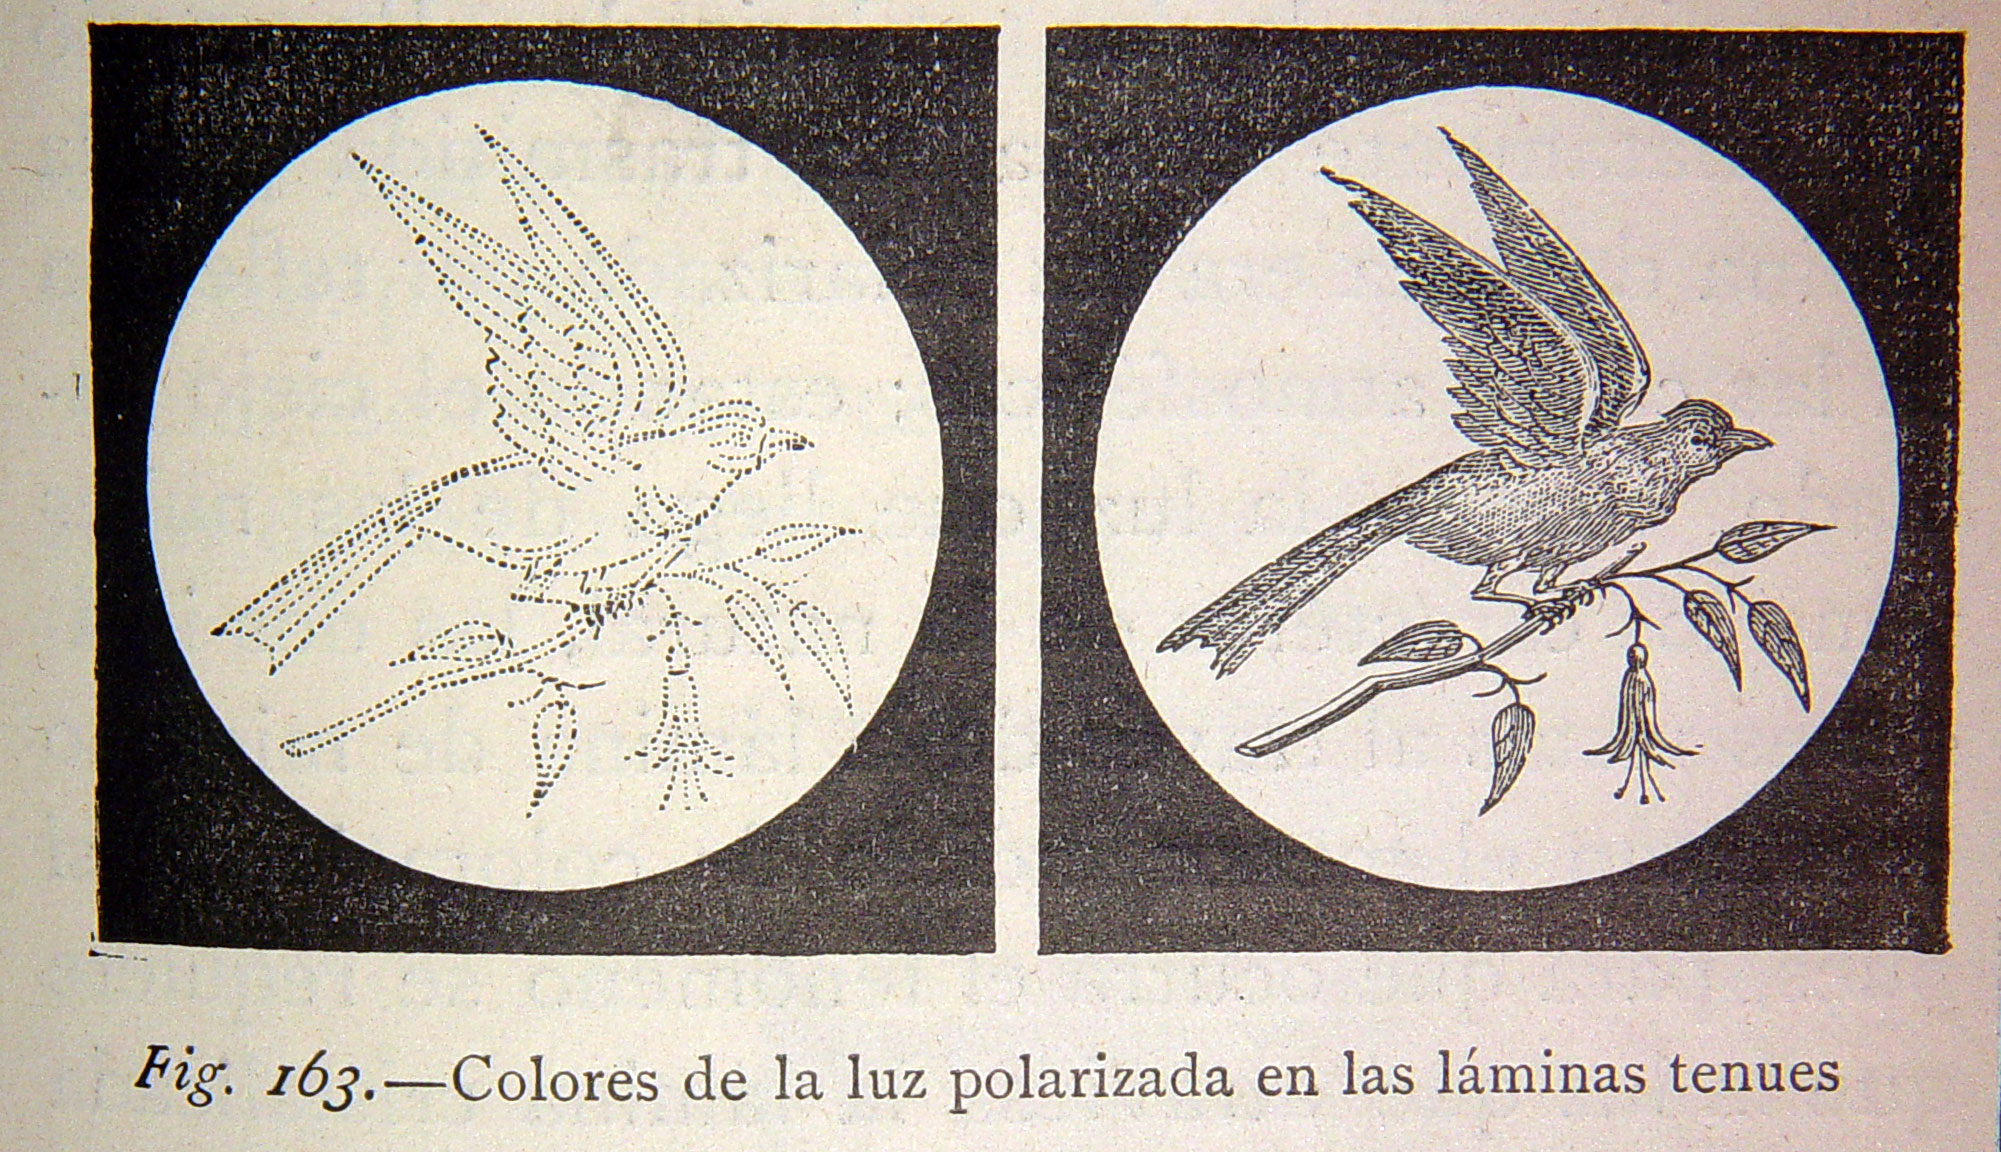 an old book with illustrations of birds in the background